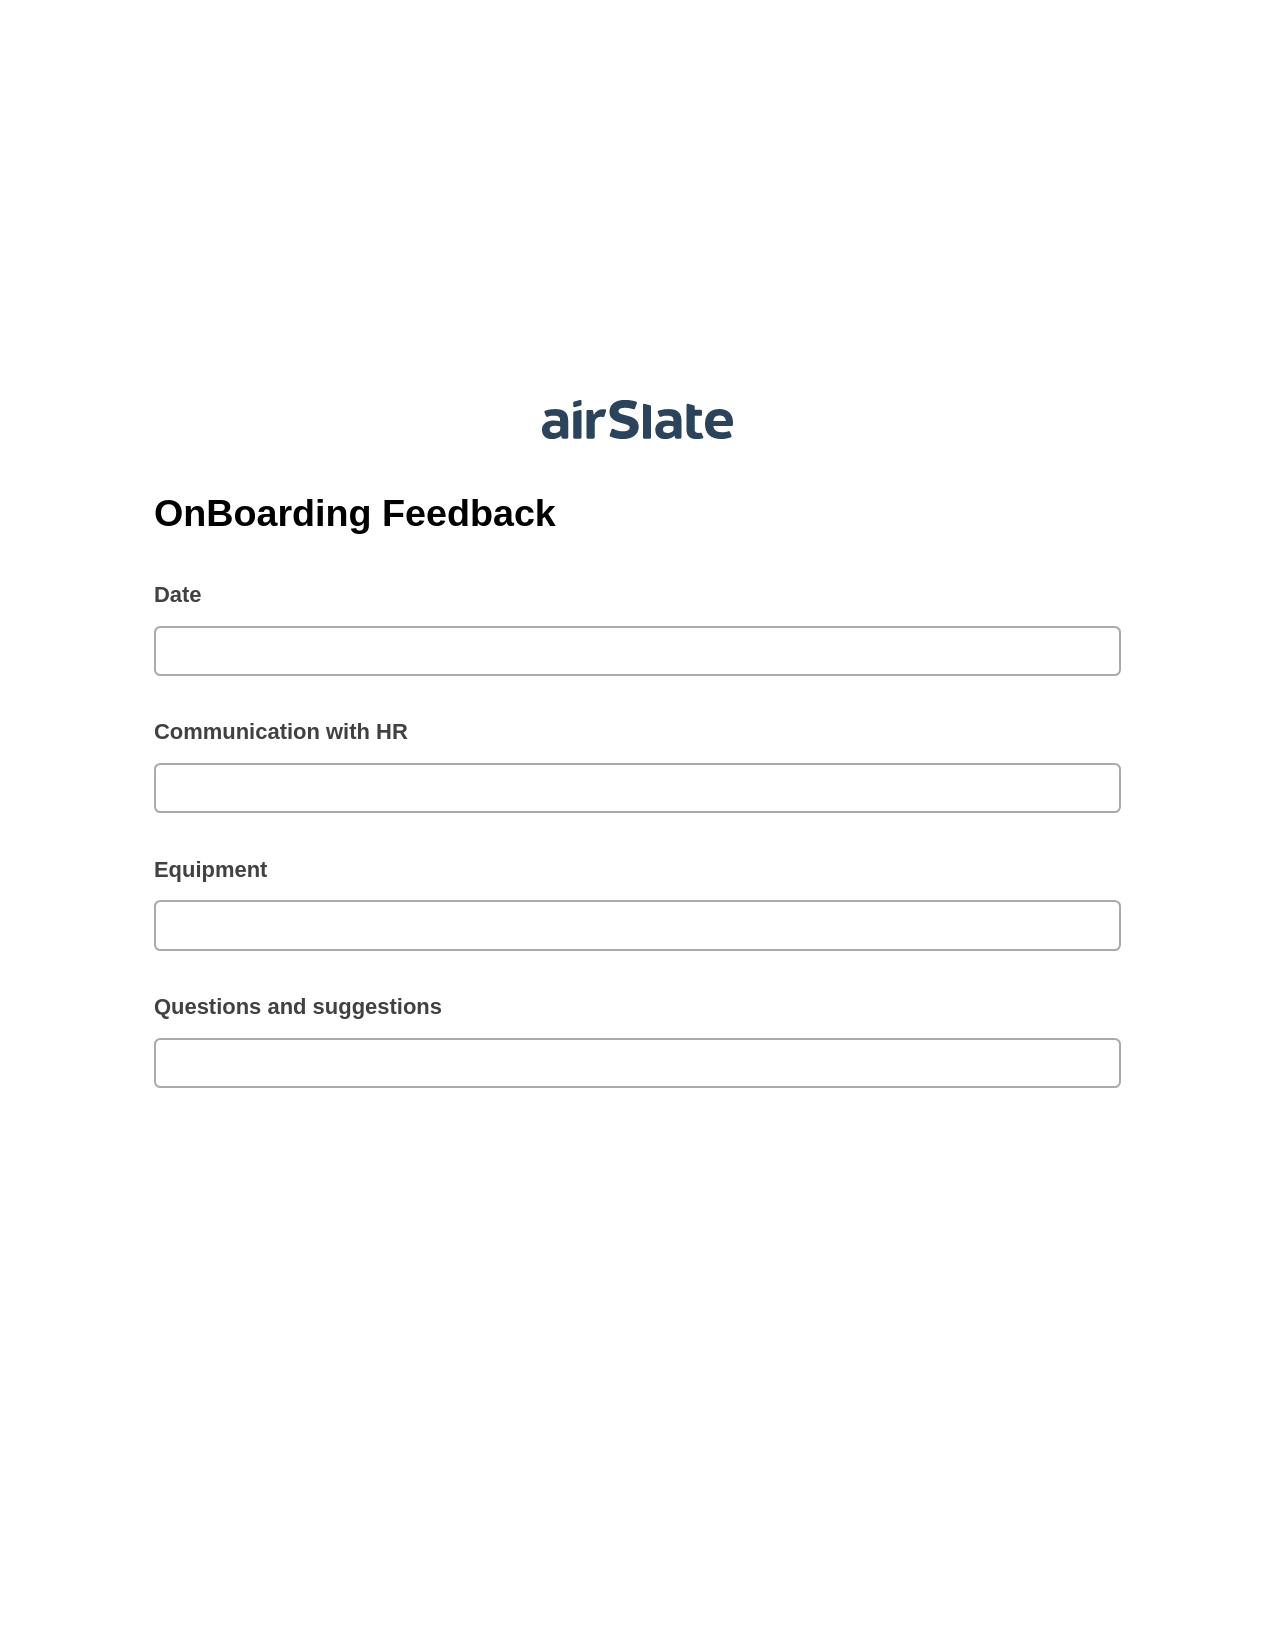 OnBoarding Feedback Pre-fill Slate from MS Dynamics 365 Records Bot, Update Salesforce Record Bot, Export to Excel 365 Bot